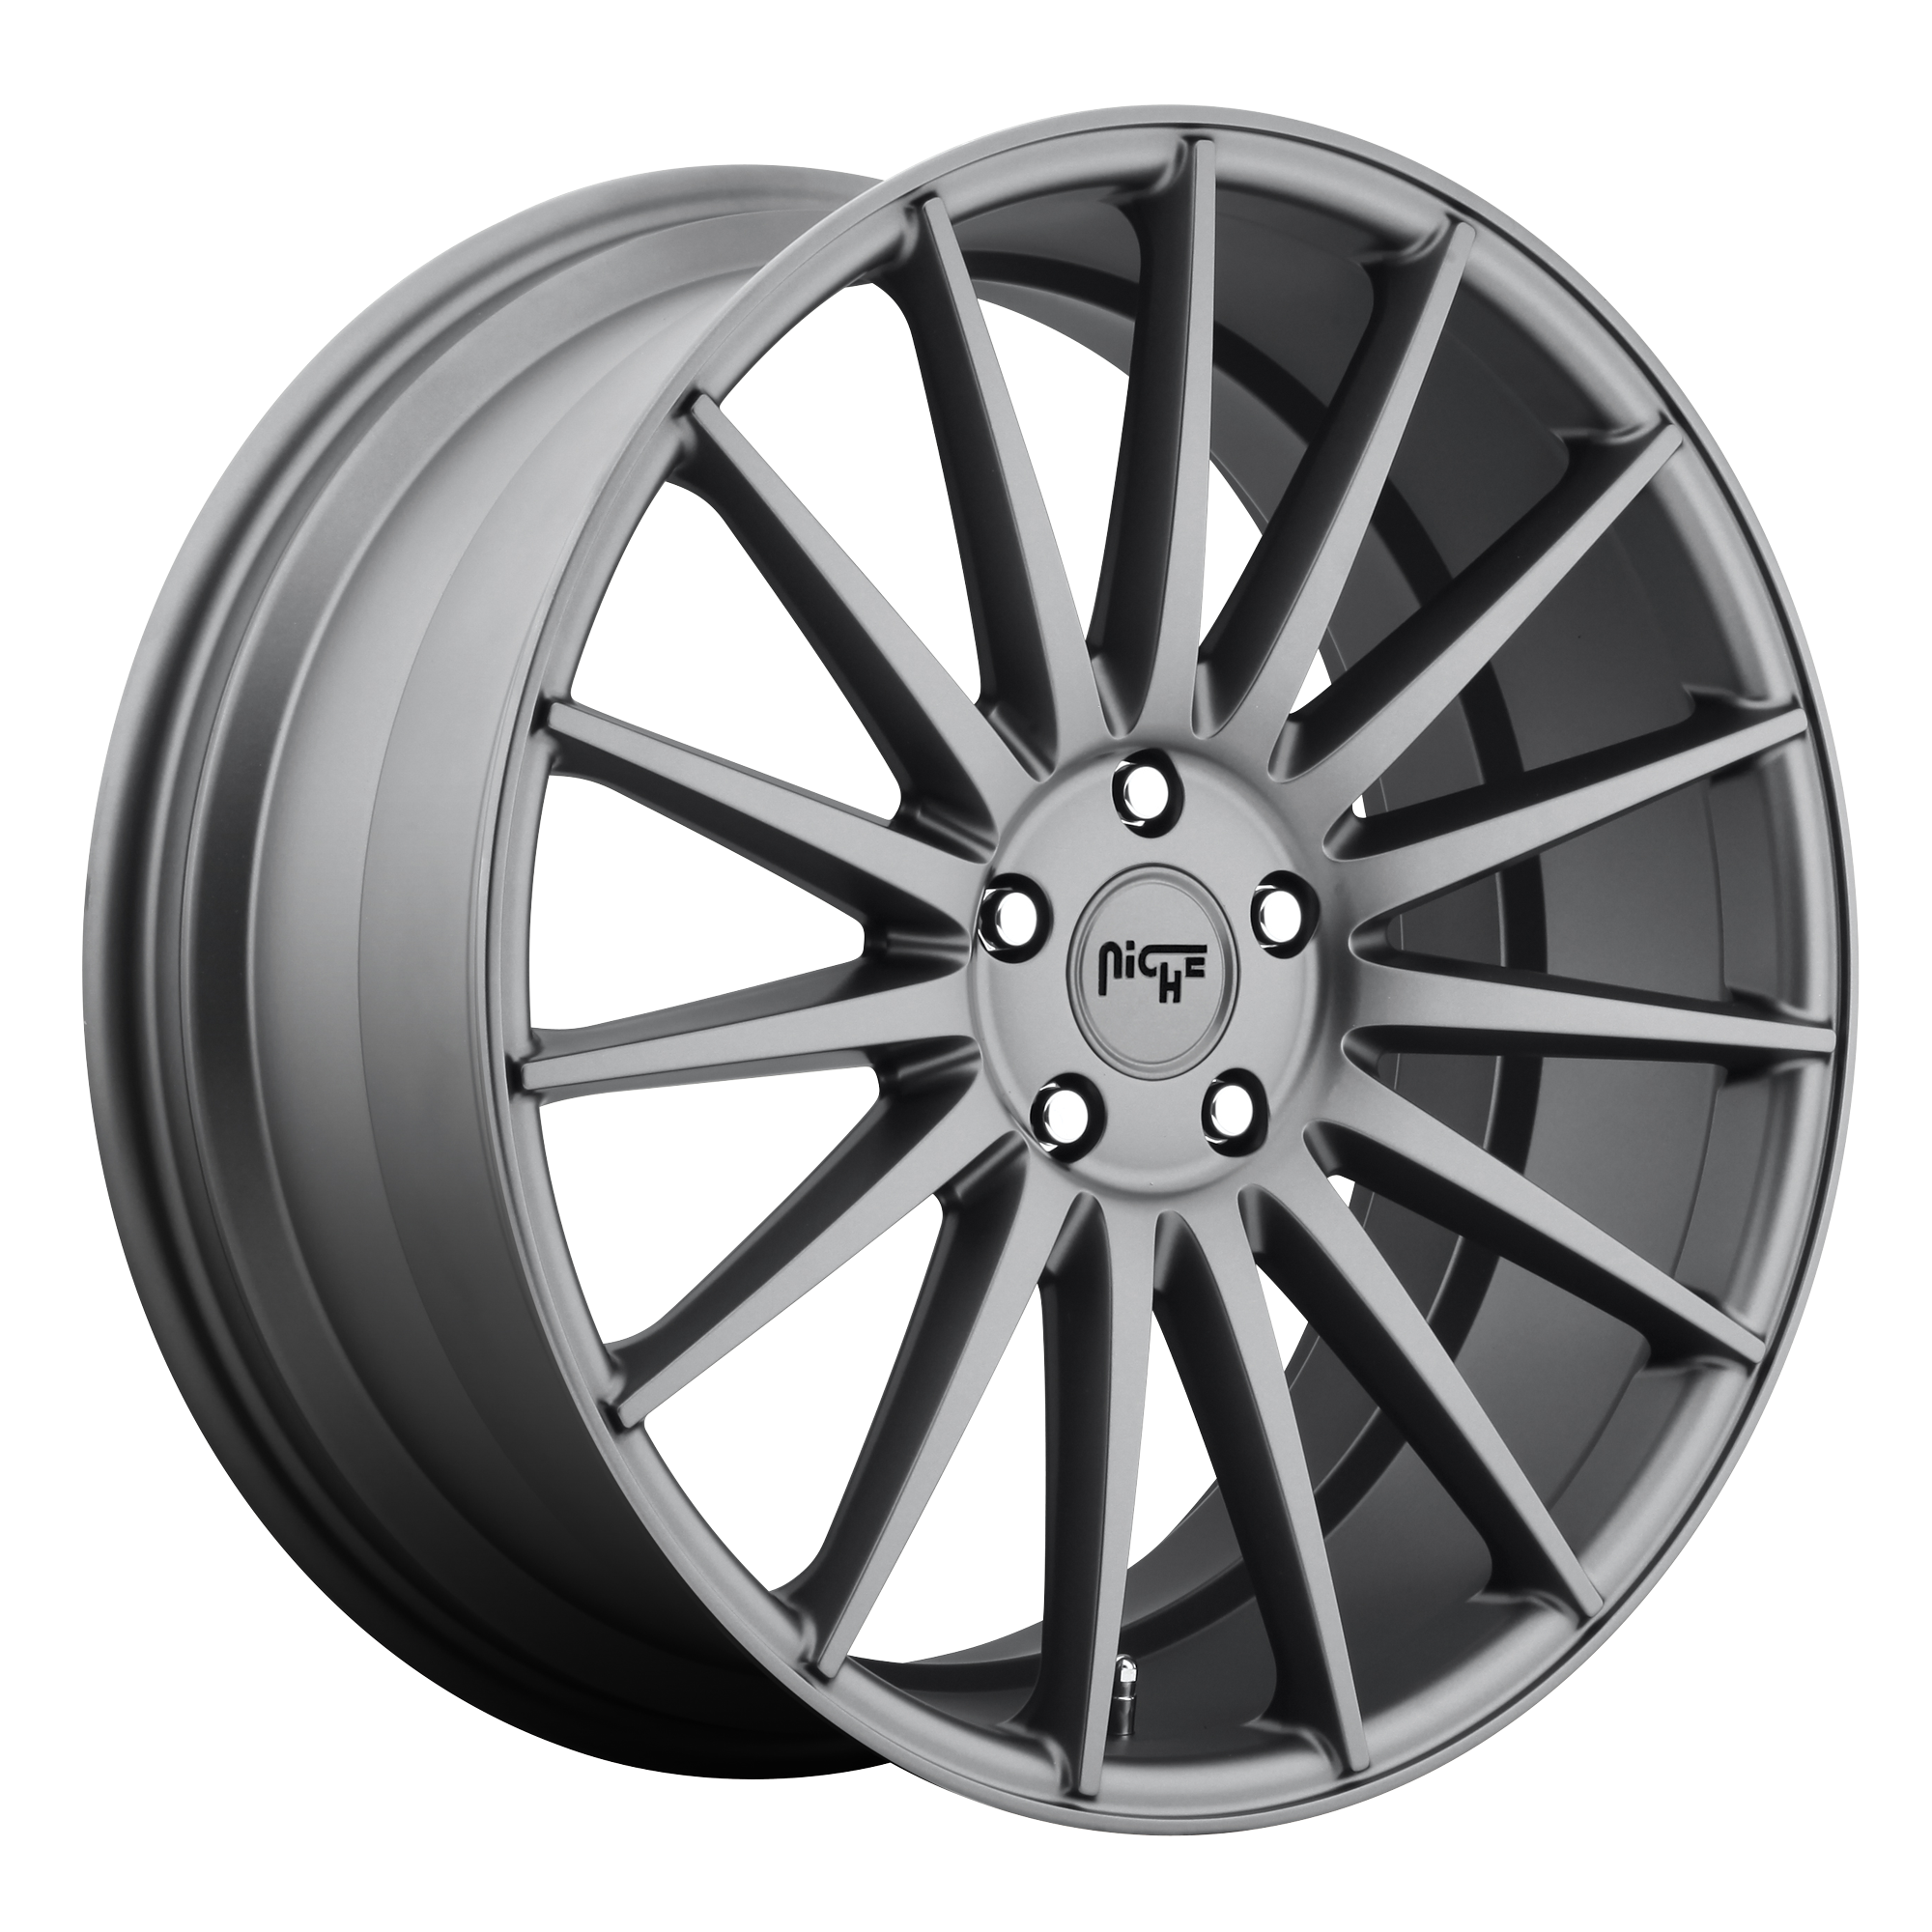 FORM 19x8.5 5x114.30 MATTE ANTHRACITE (35 mm) - Tires and Engine Performance